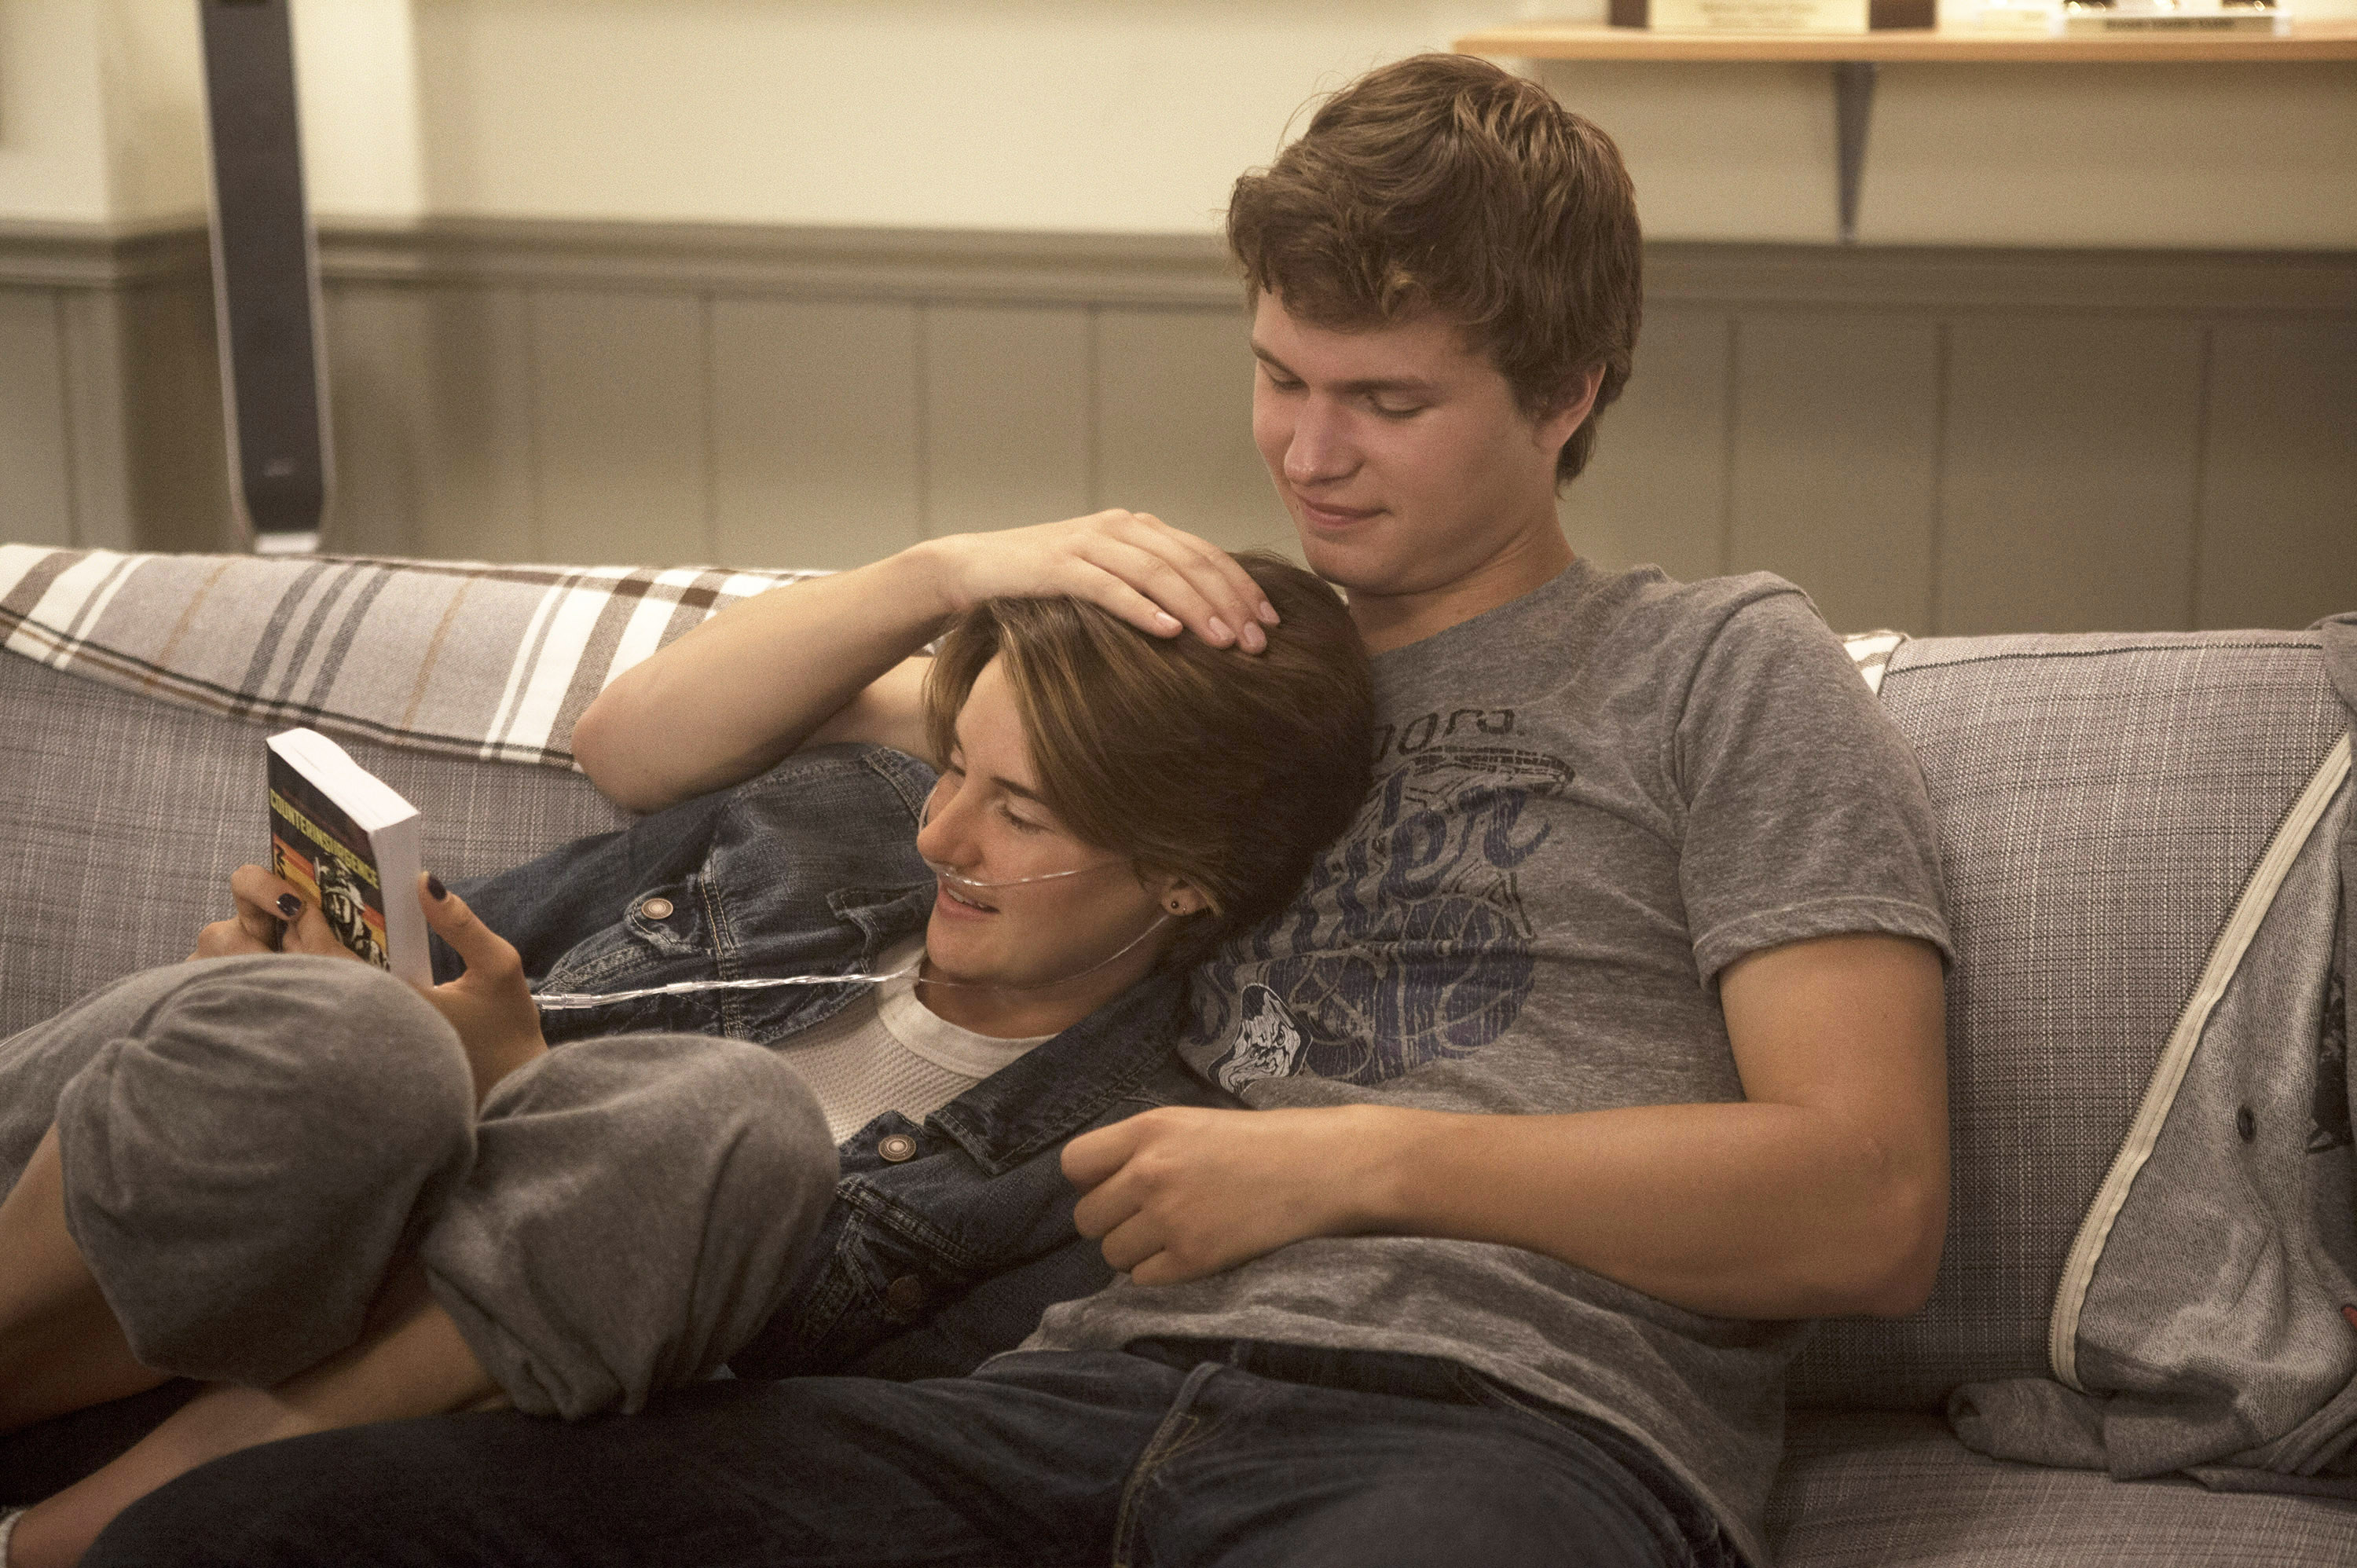 Hazel and Gus cuddle on the couch together